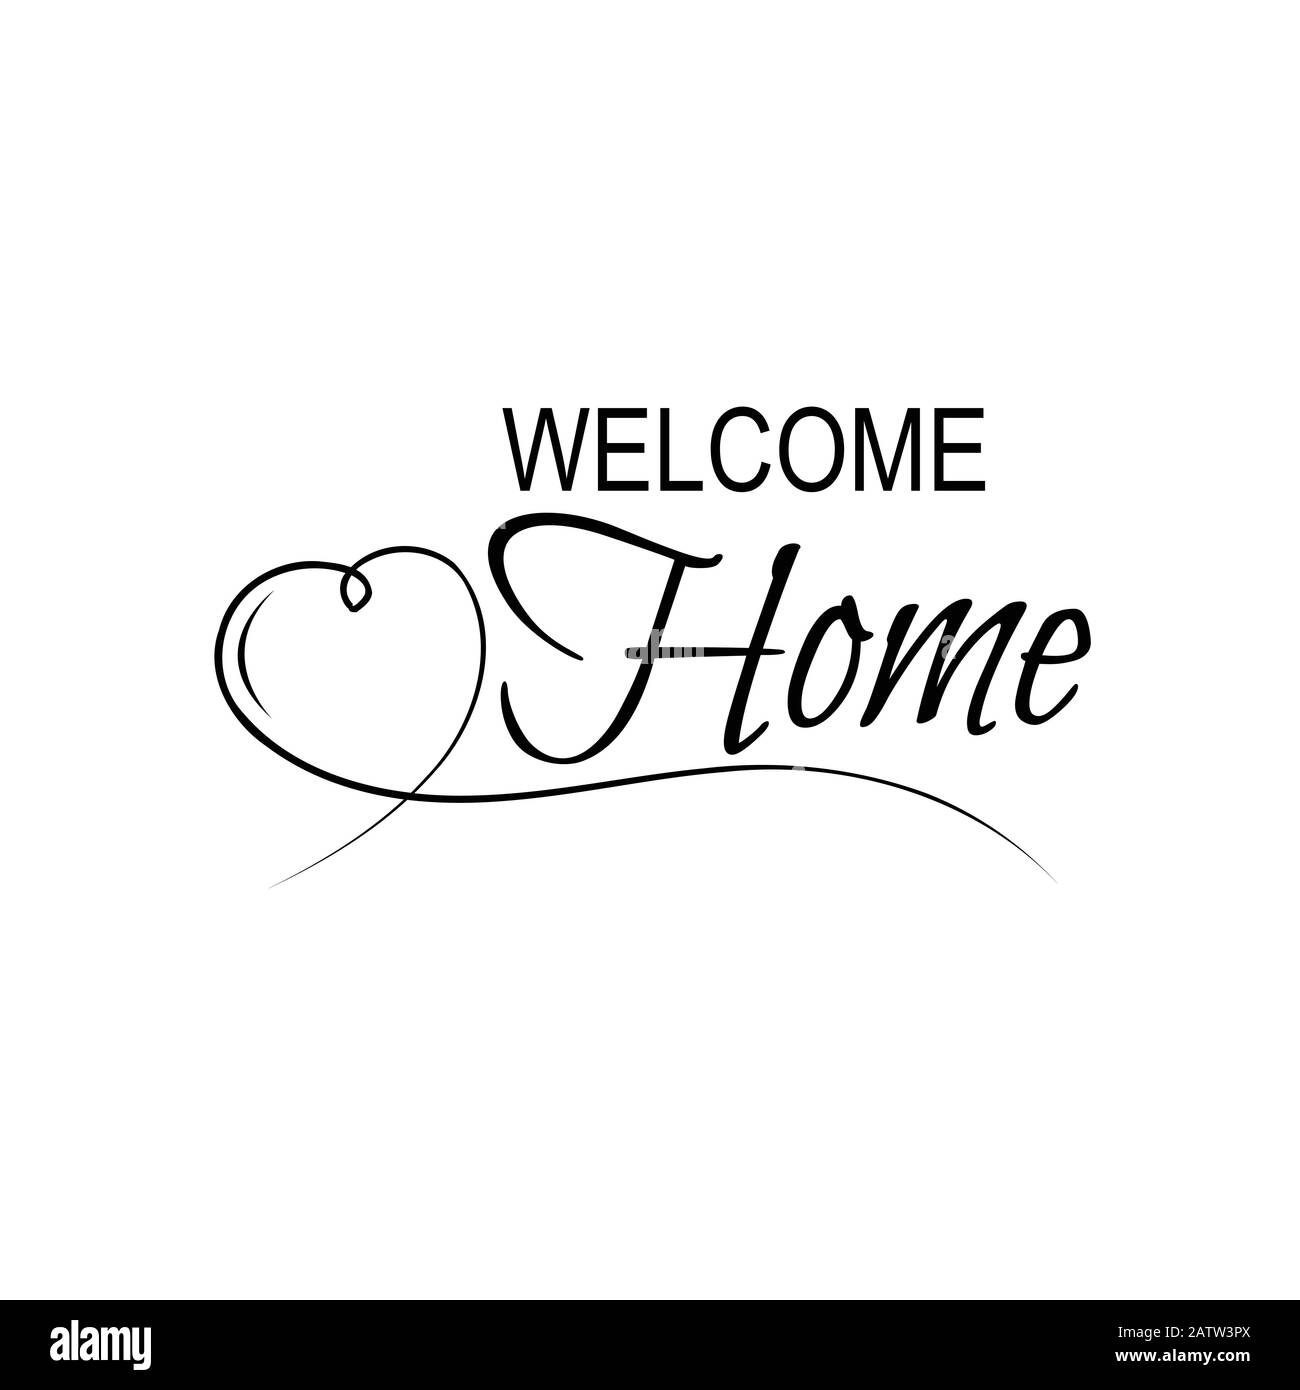 Welcome home. Greeting card with brush lettering. Hand drawn design element. Perfect for cards and posters, billboards and photo overlays. Stock Vector